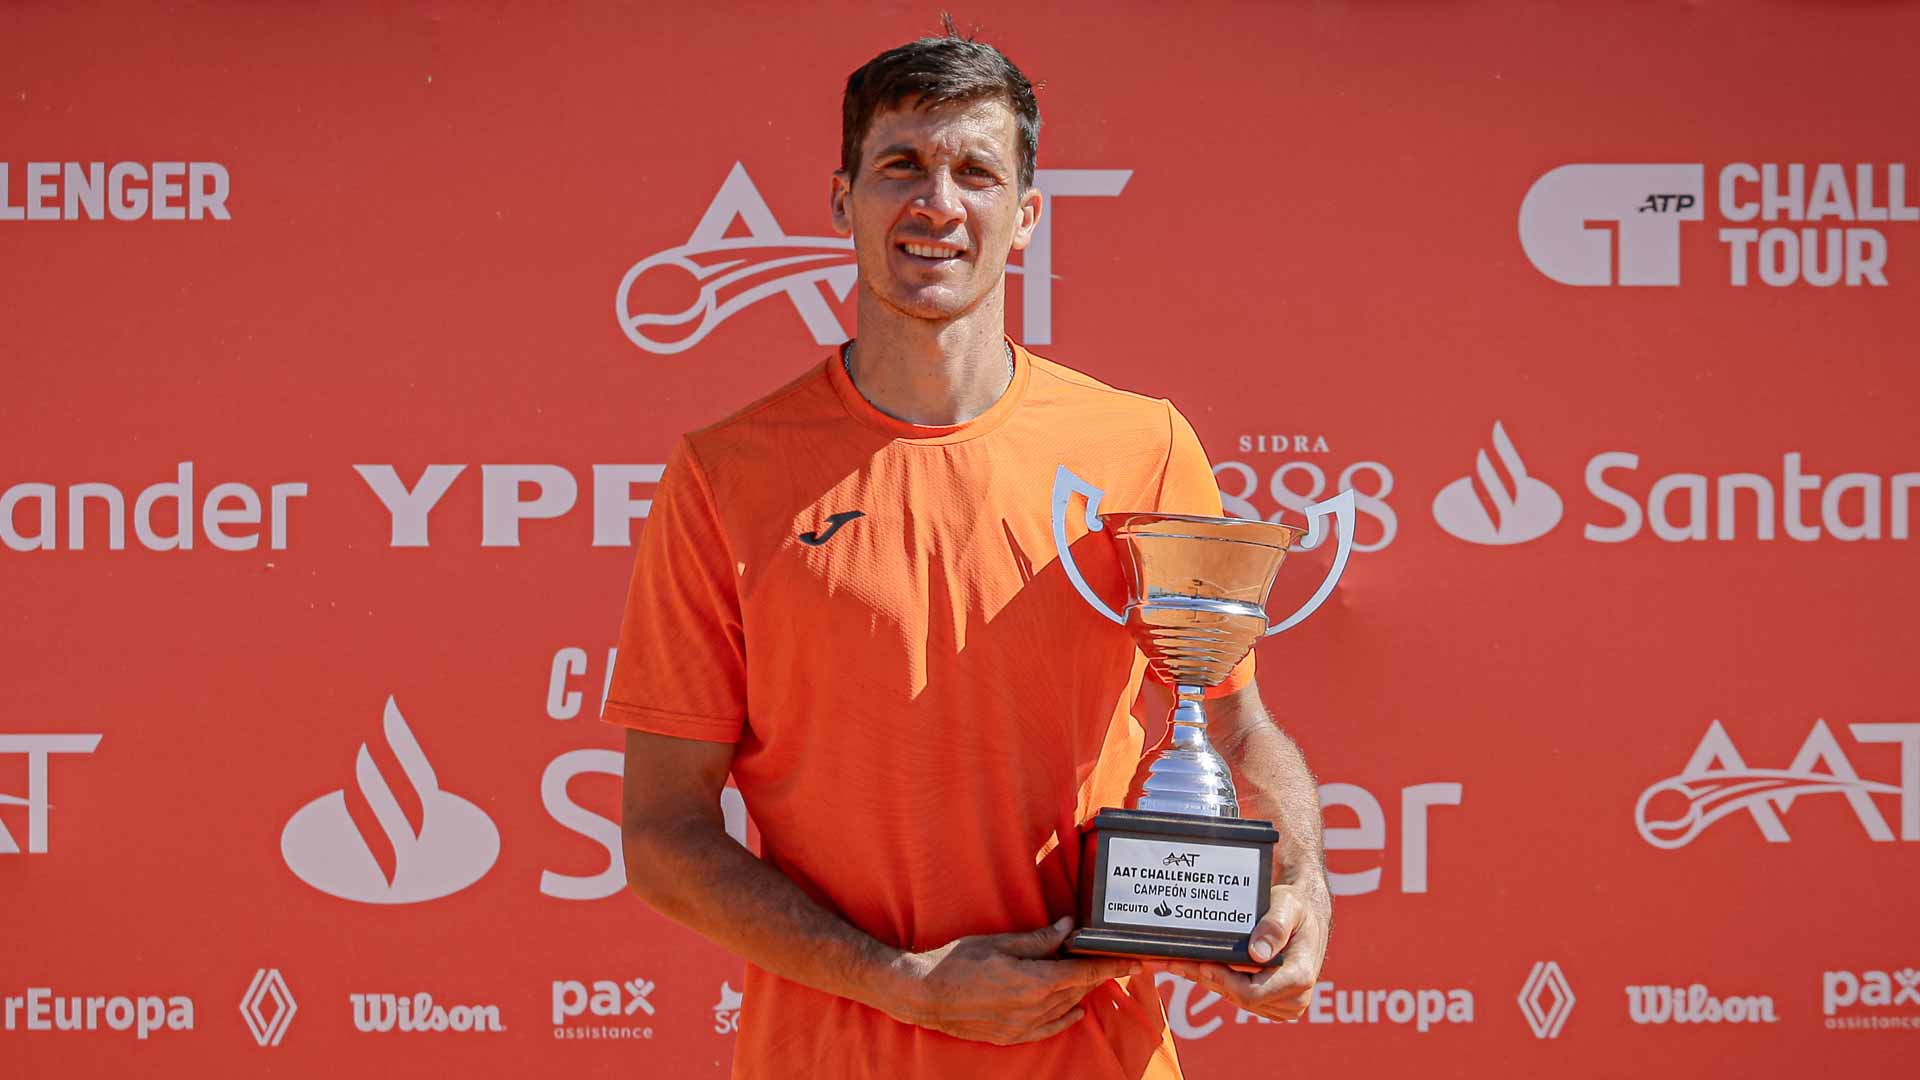 <a href='https://www.atptour.com/en/players/facundo-bagnis/bf23/overview'>Facundo Bagnis</a> wins the ATP Challenger 50 event in Buenos Aires.